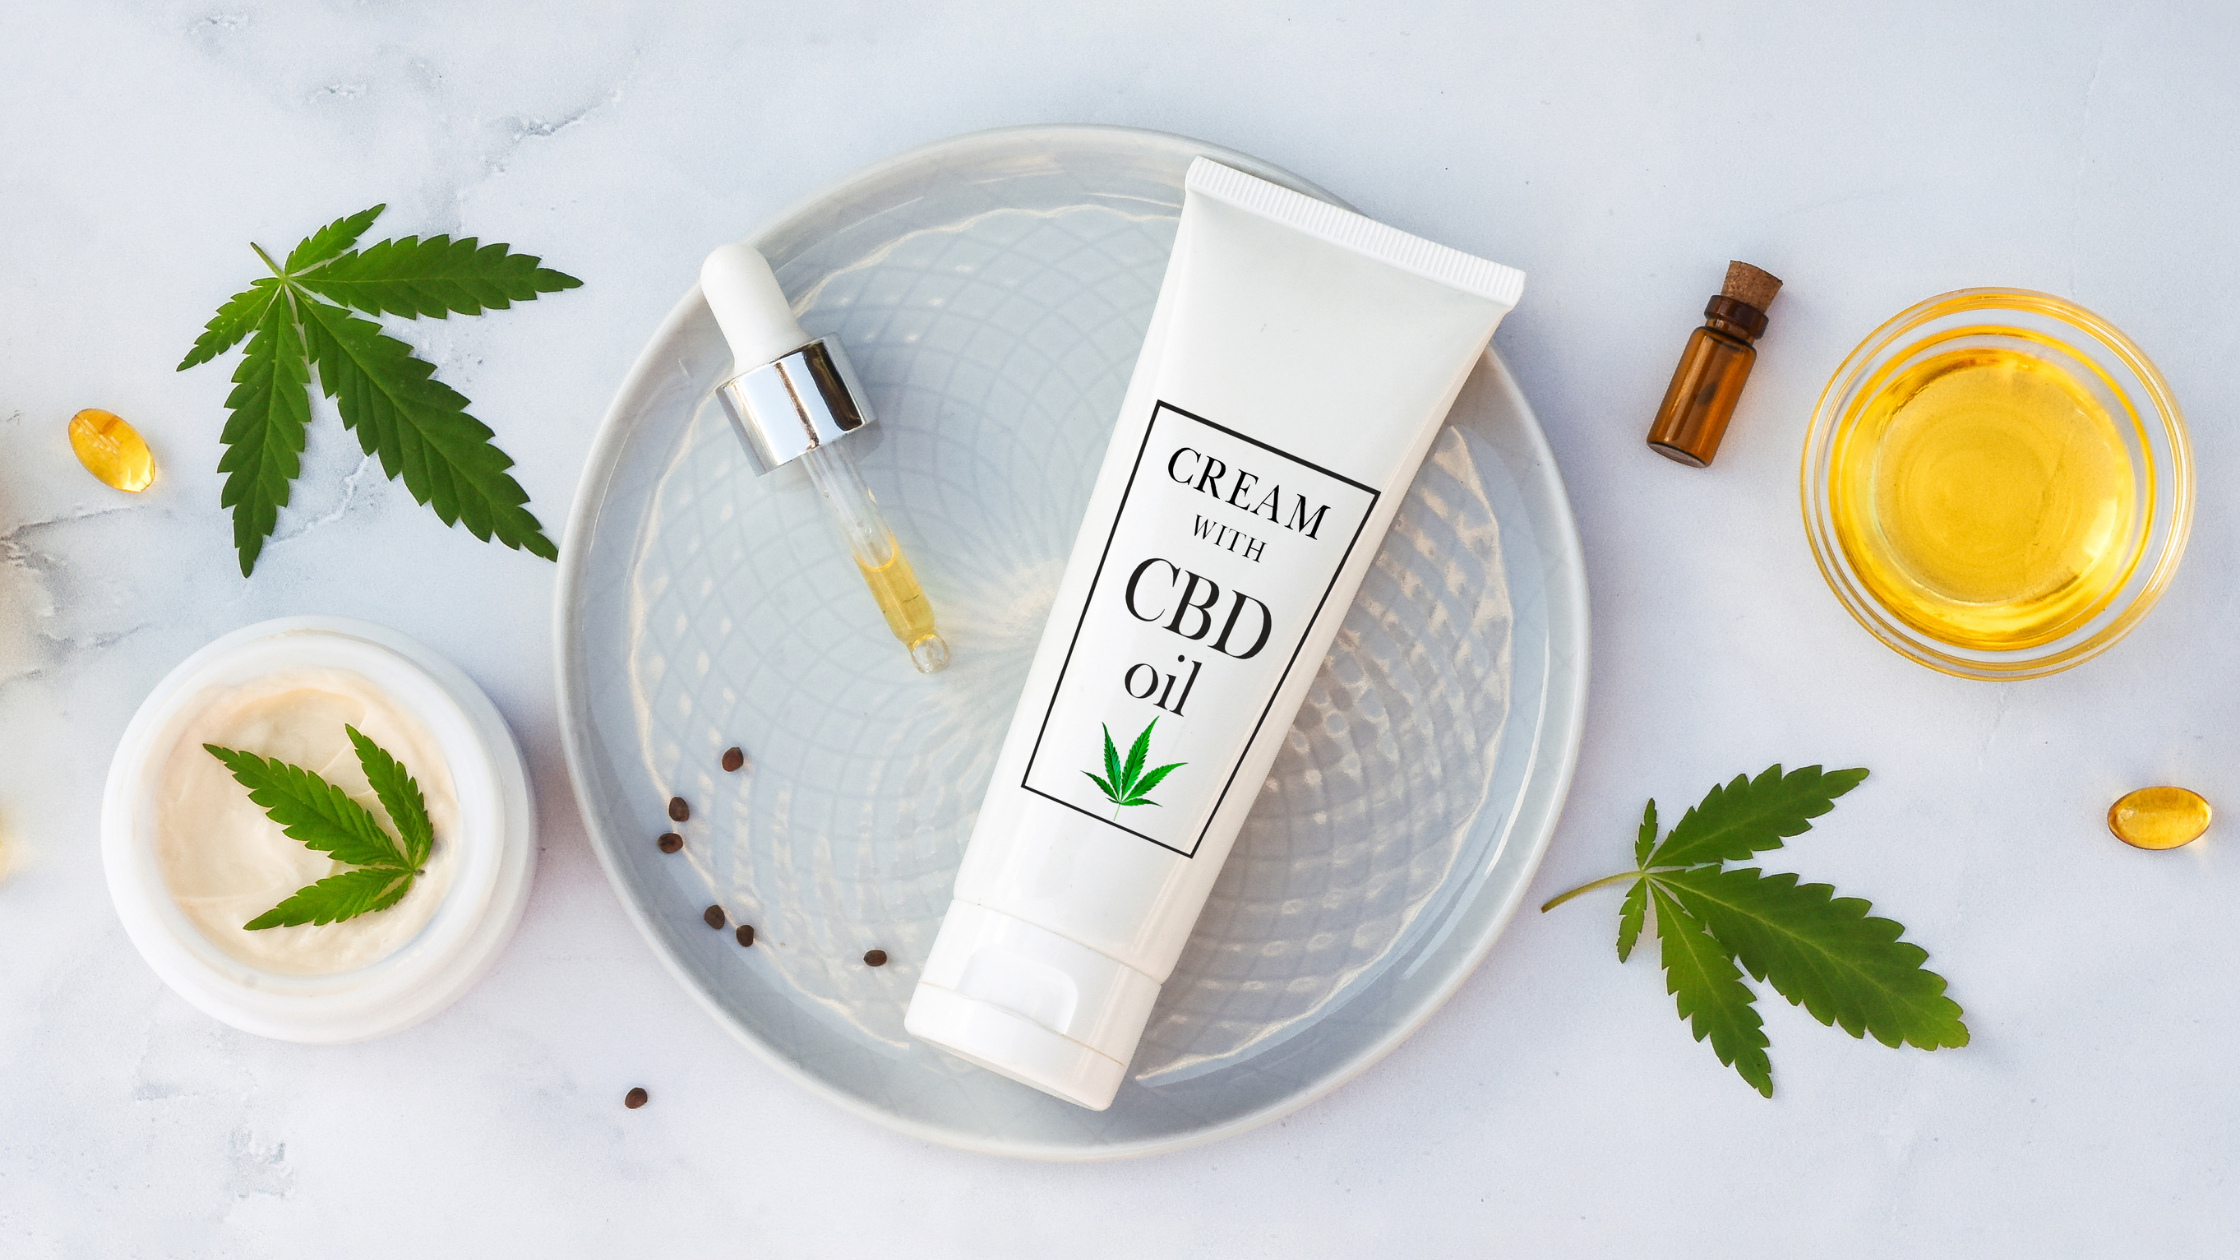 Have you considered using CBD oil lotion or a tincture?